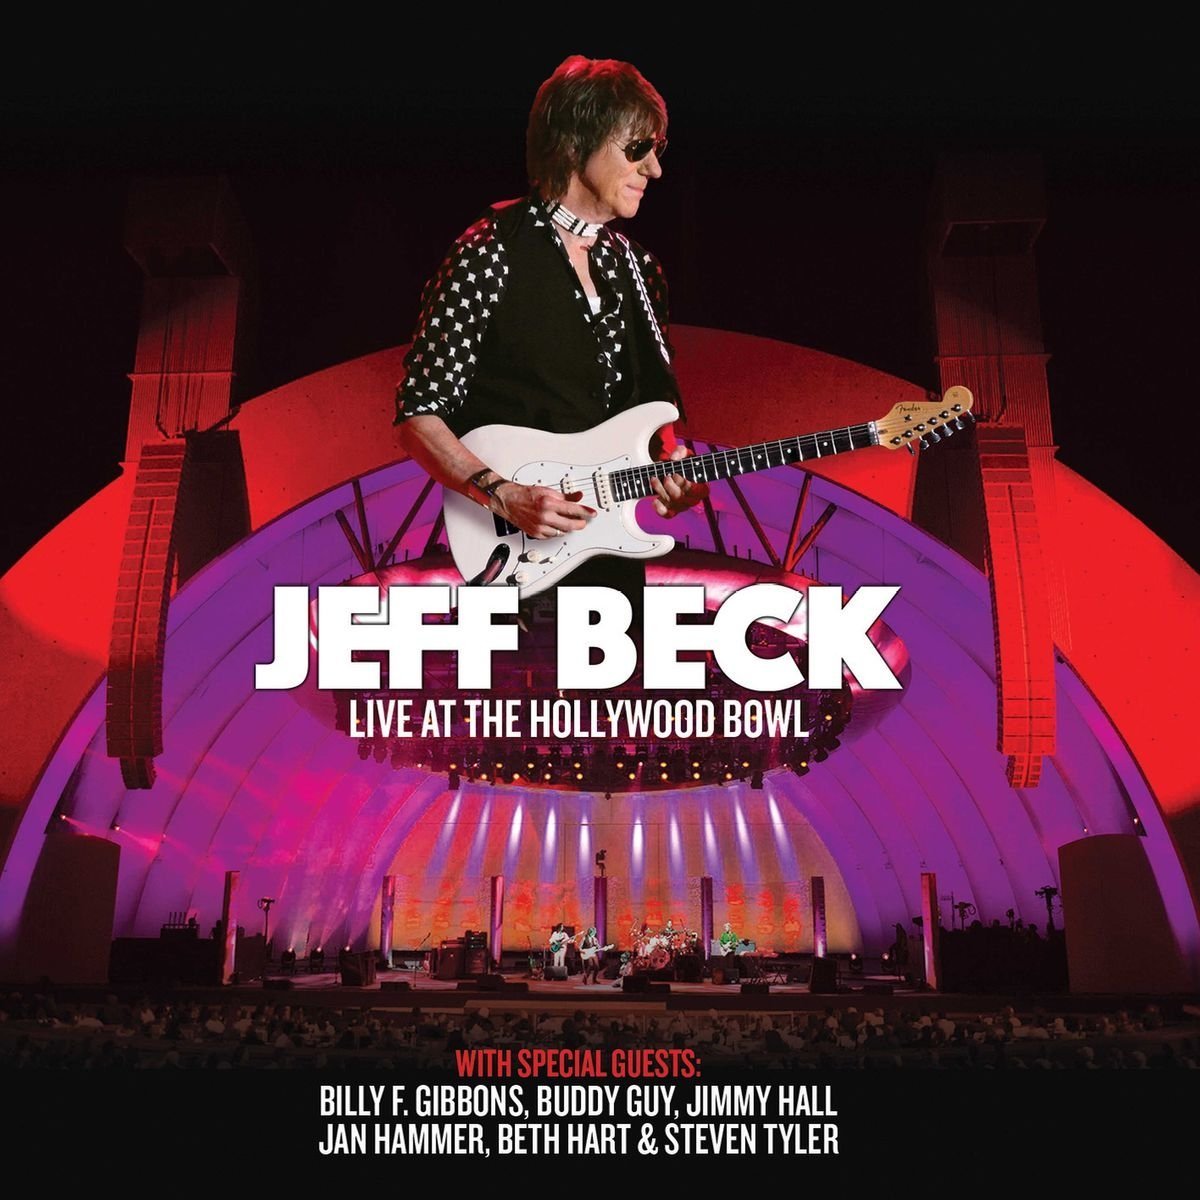 Jeff Beck - Live At The Hollywood Bowl (2017) 24bit FLAC Download